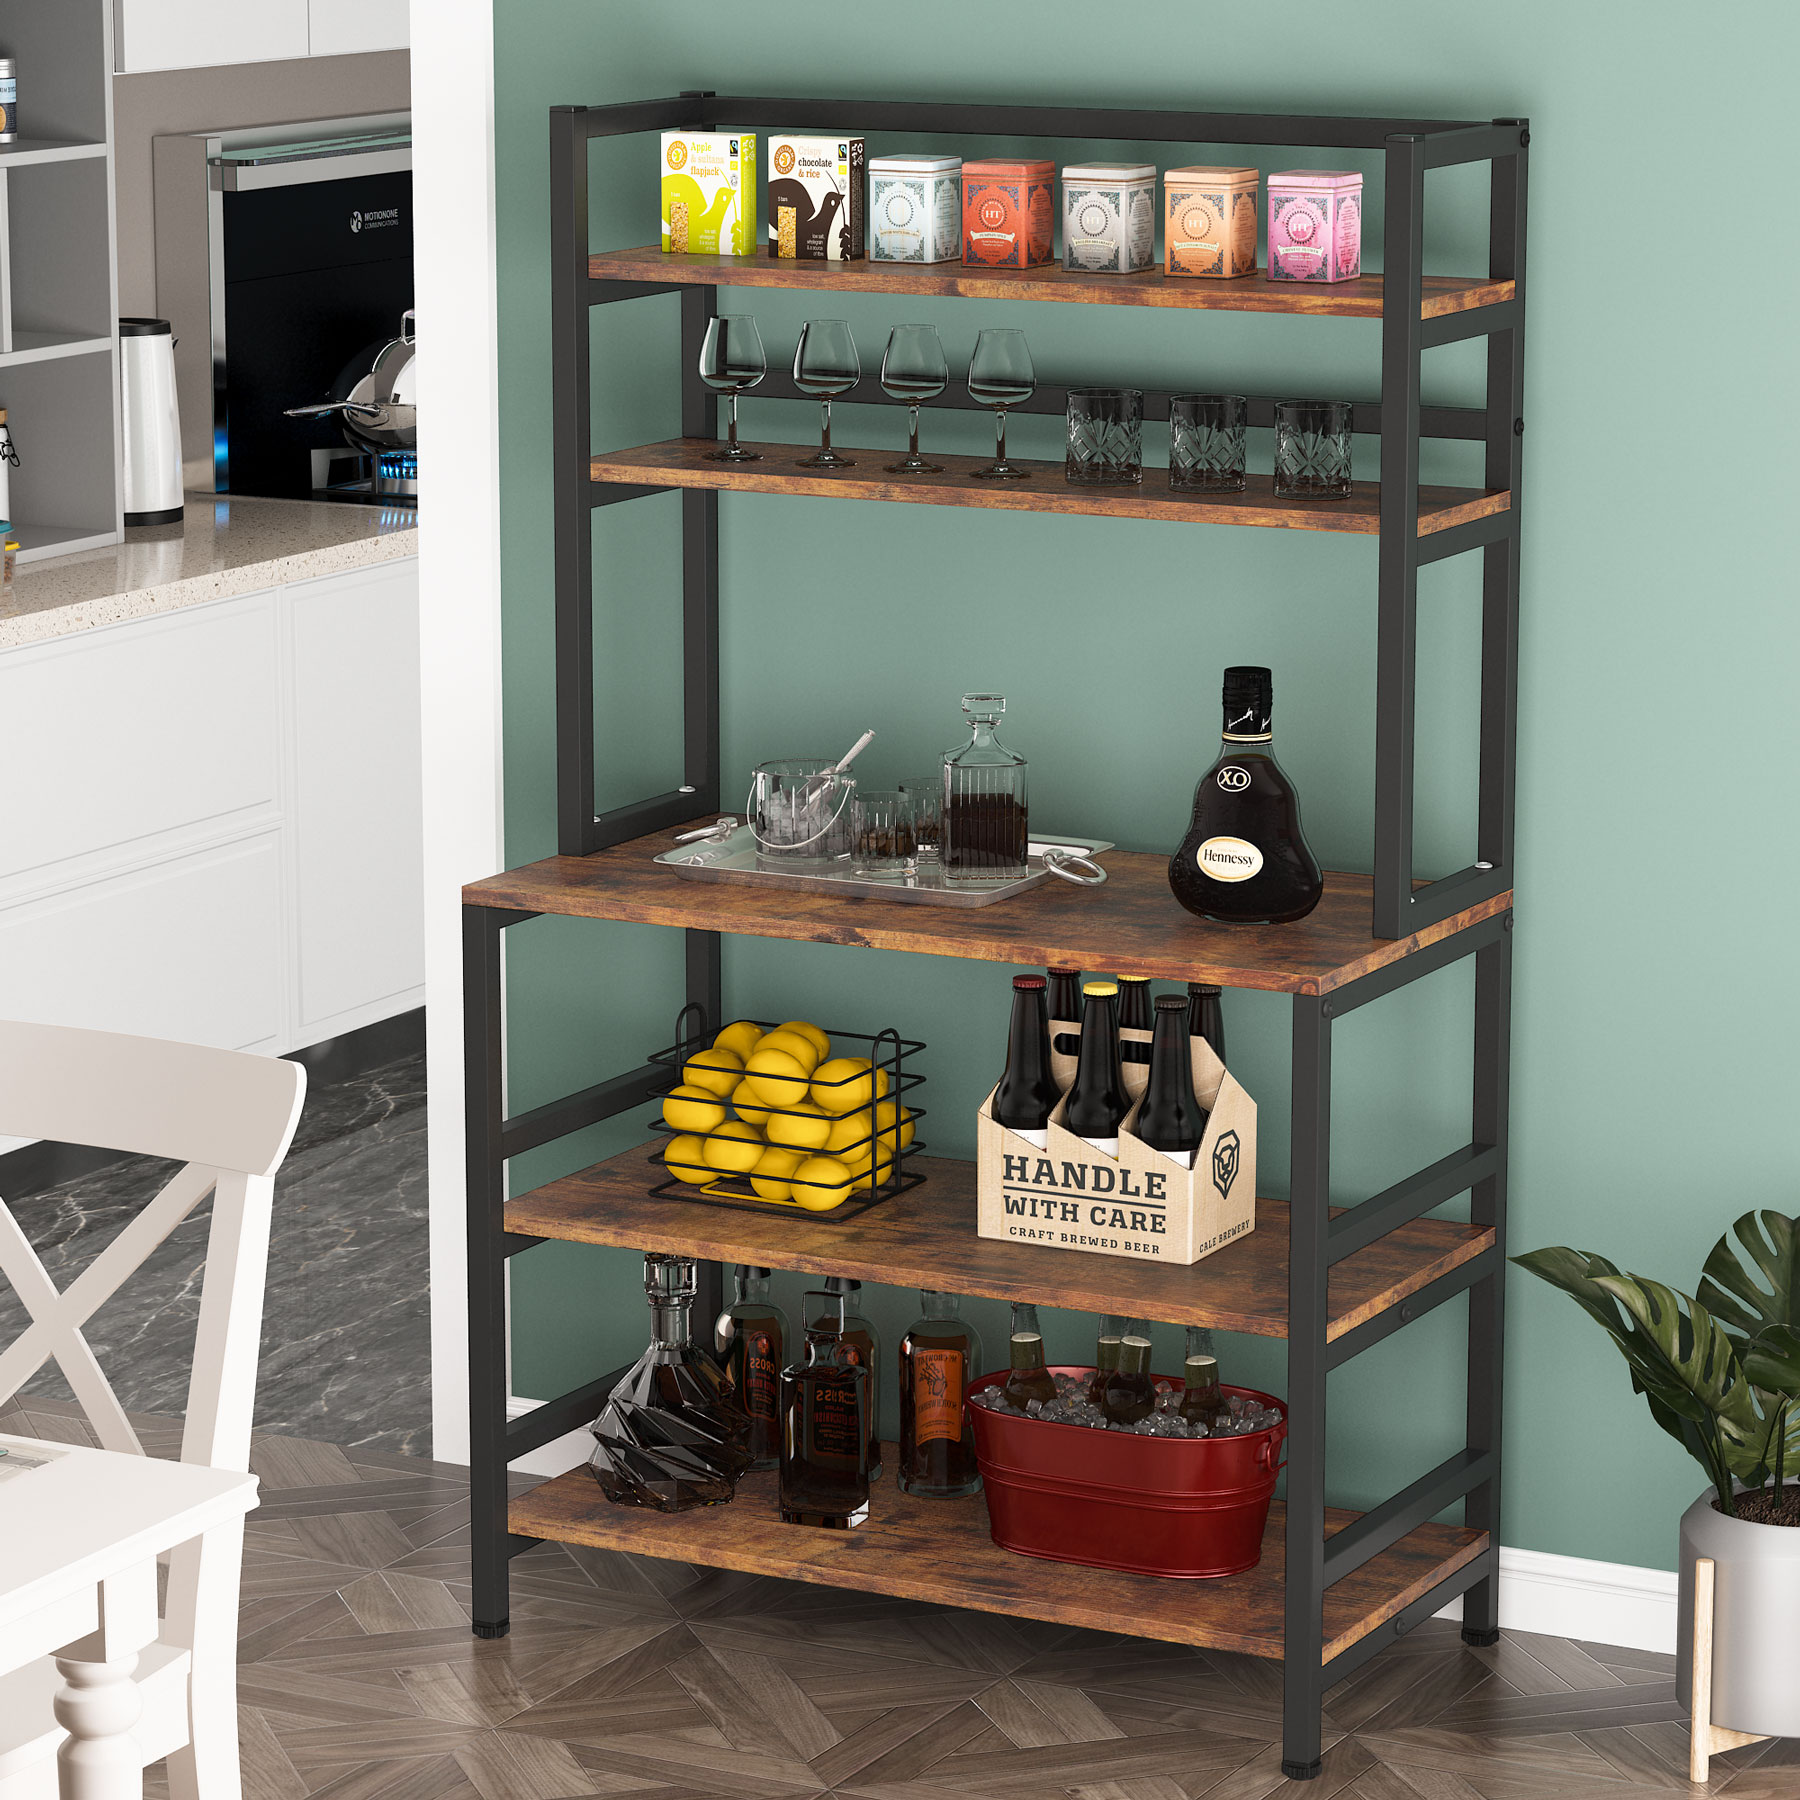 Tribesigns Brown Metal Base with Wood Top Kitchen Island (15.7-in x 31.5-in x 62.99-in) | HOGA-JW0107